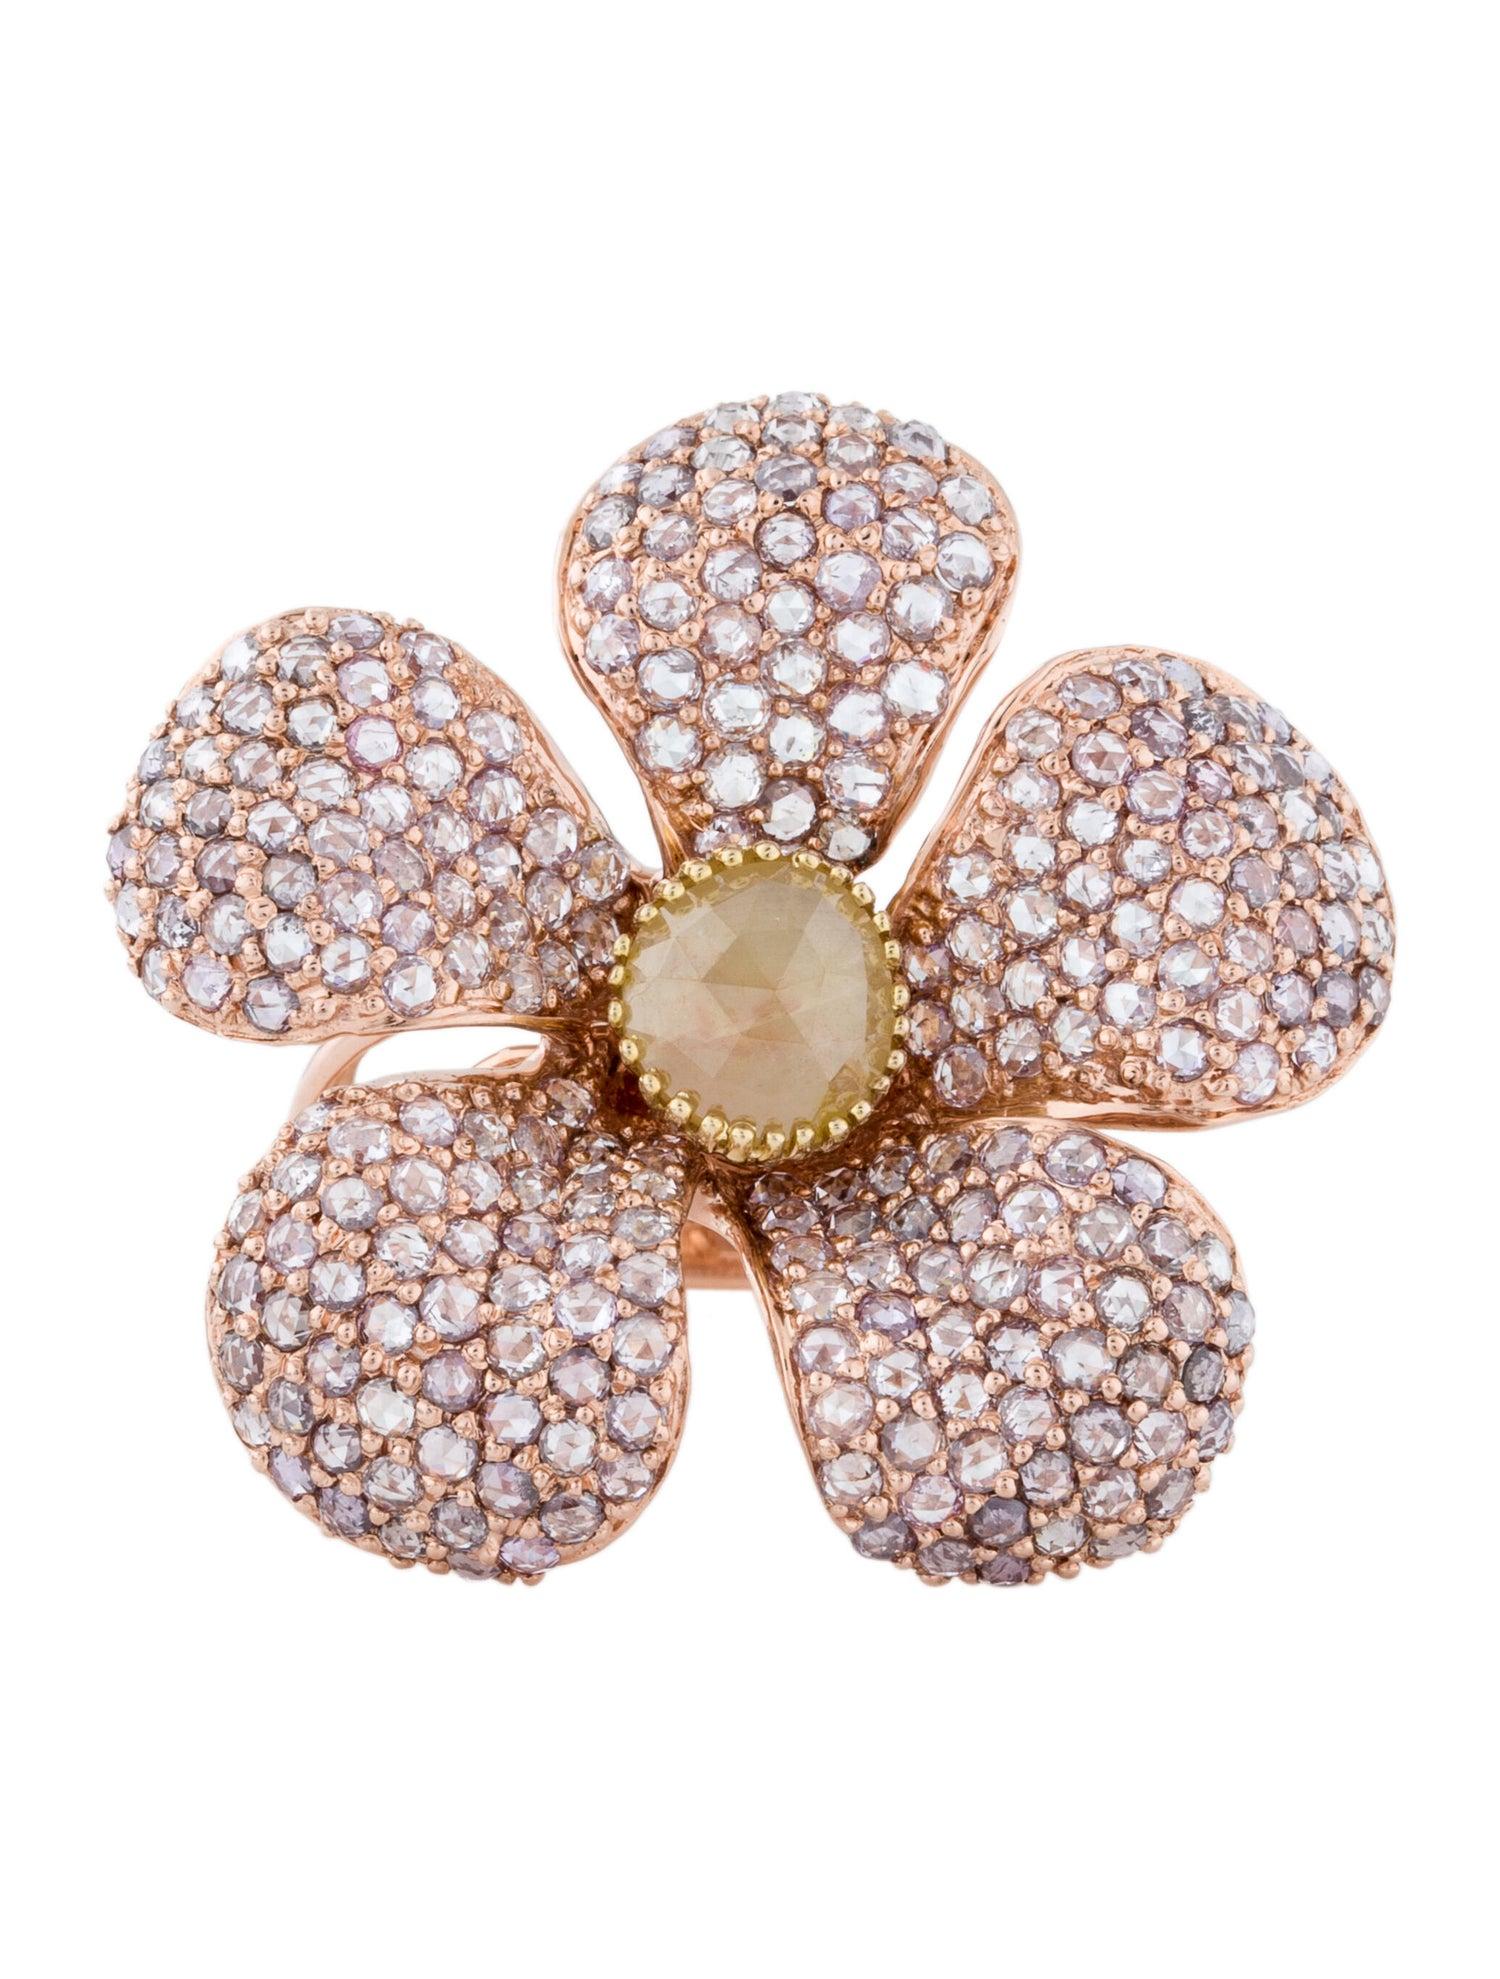 A beautiful 14Kt rose gold diamond ring featuring Fancy Pink Rose cut diamonds throughout and an oval rose cut yellow diamond at center. Some of the fancy colored stones are treated to enhance the color. There are 250 pink rose cut diamonds set in